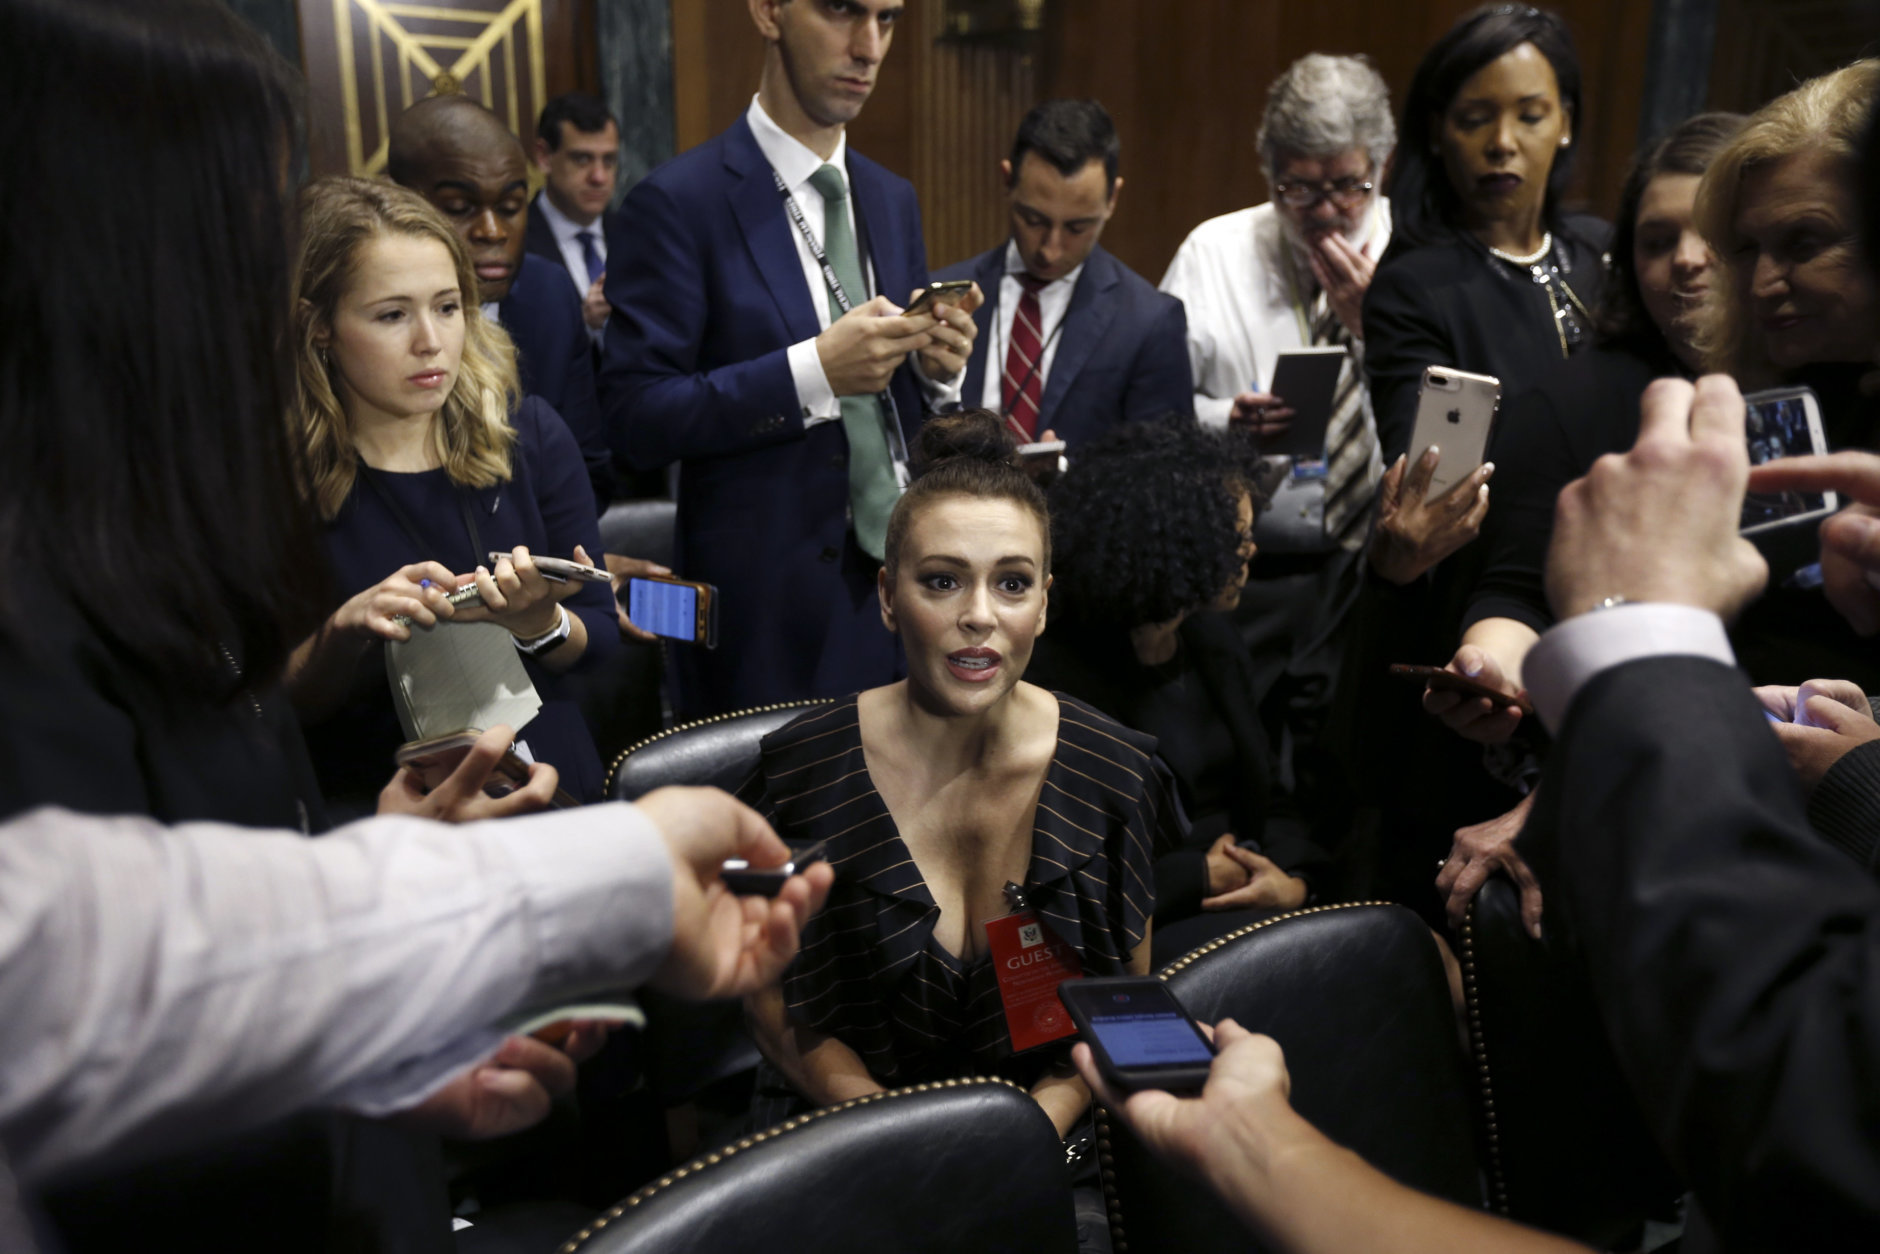 Actress Alyssa Milano talks to the media after she arrived for the Senate Judiciary hearing on Capitol Hill in Washington, Thursday, Sept. 27, 2018. with Christine Blasey Ford and Supreme Court nominee Brett Kavanaugh. (Michael Reynolds/Pool Photo via AP)